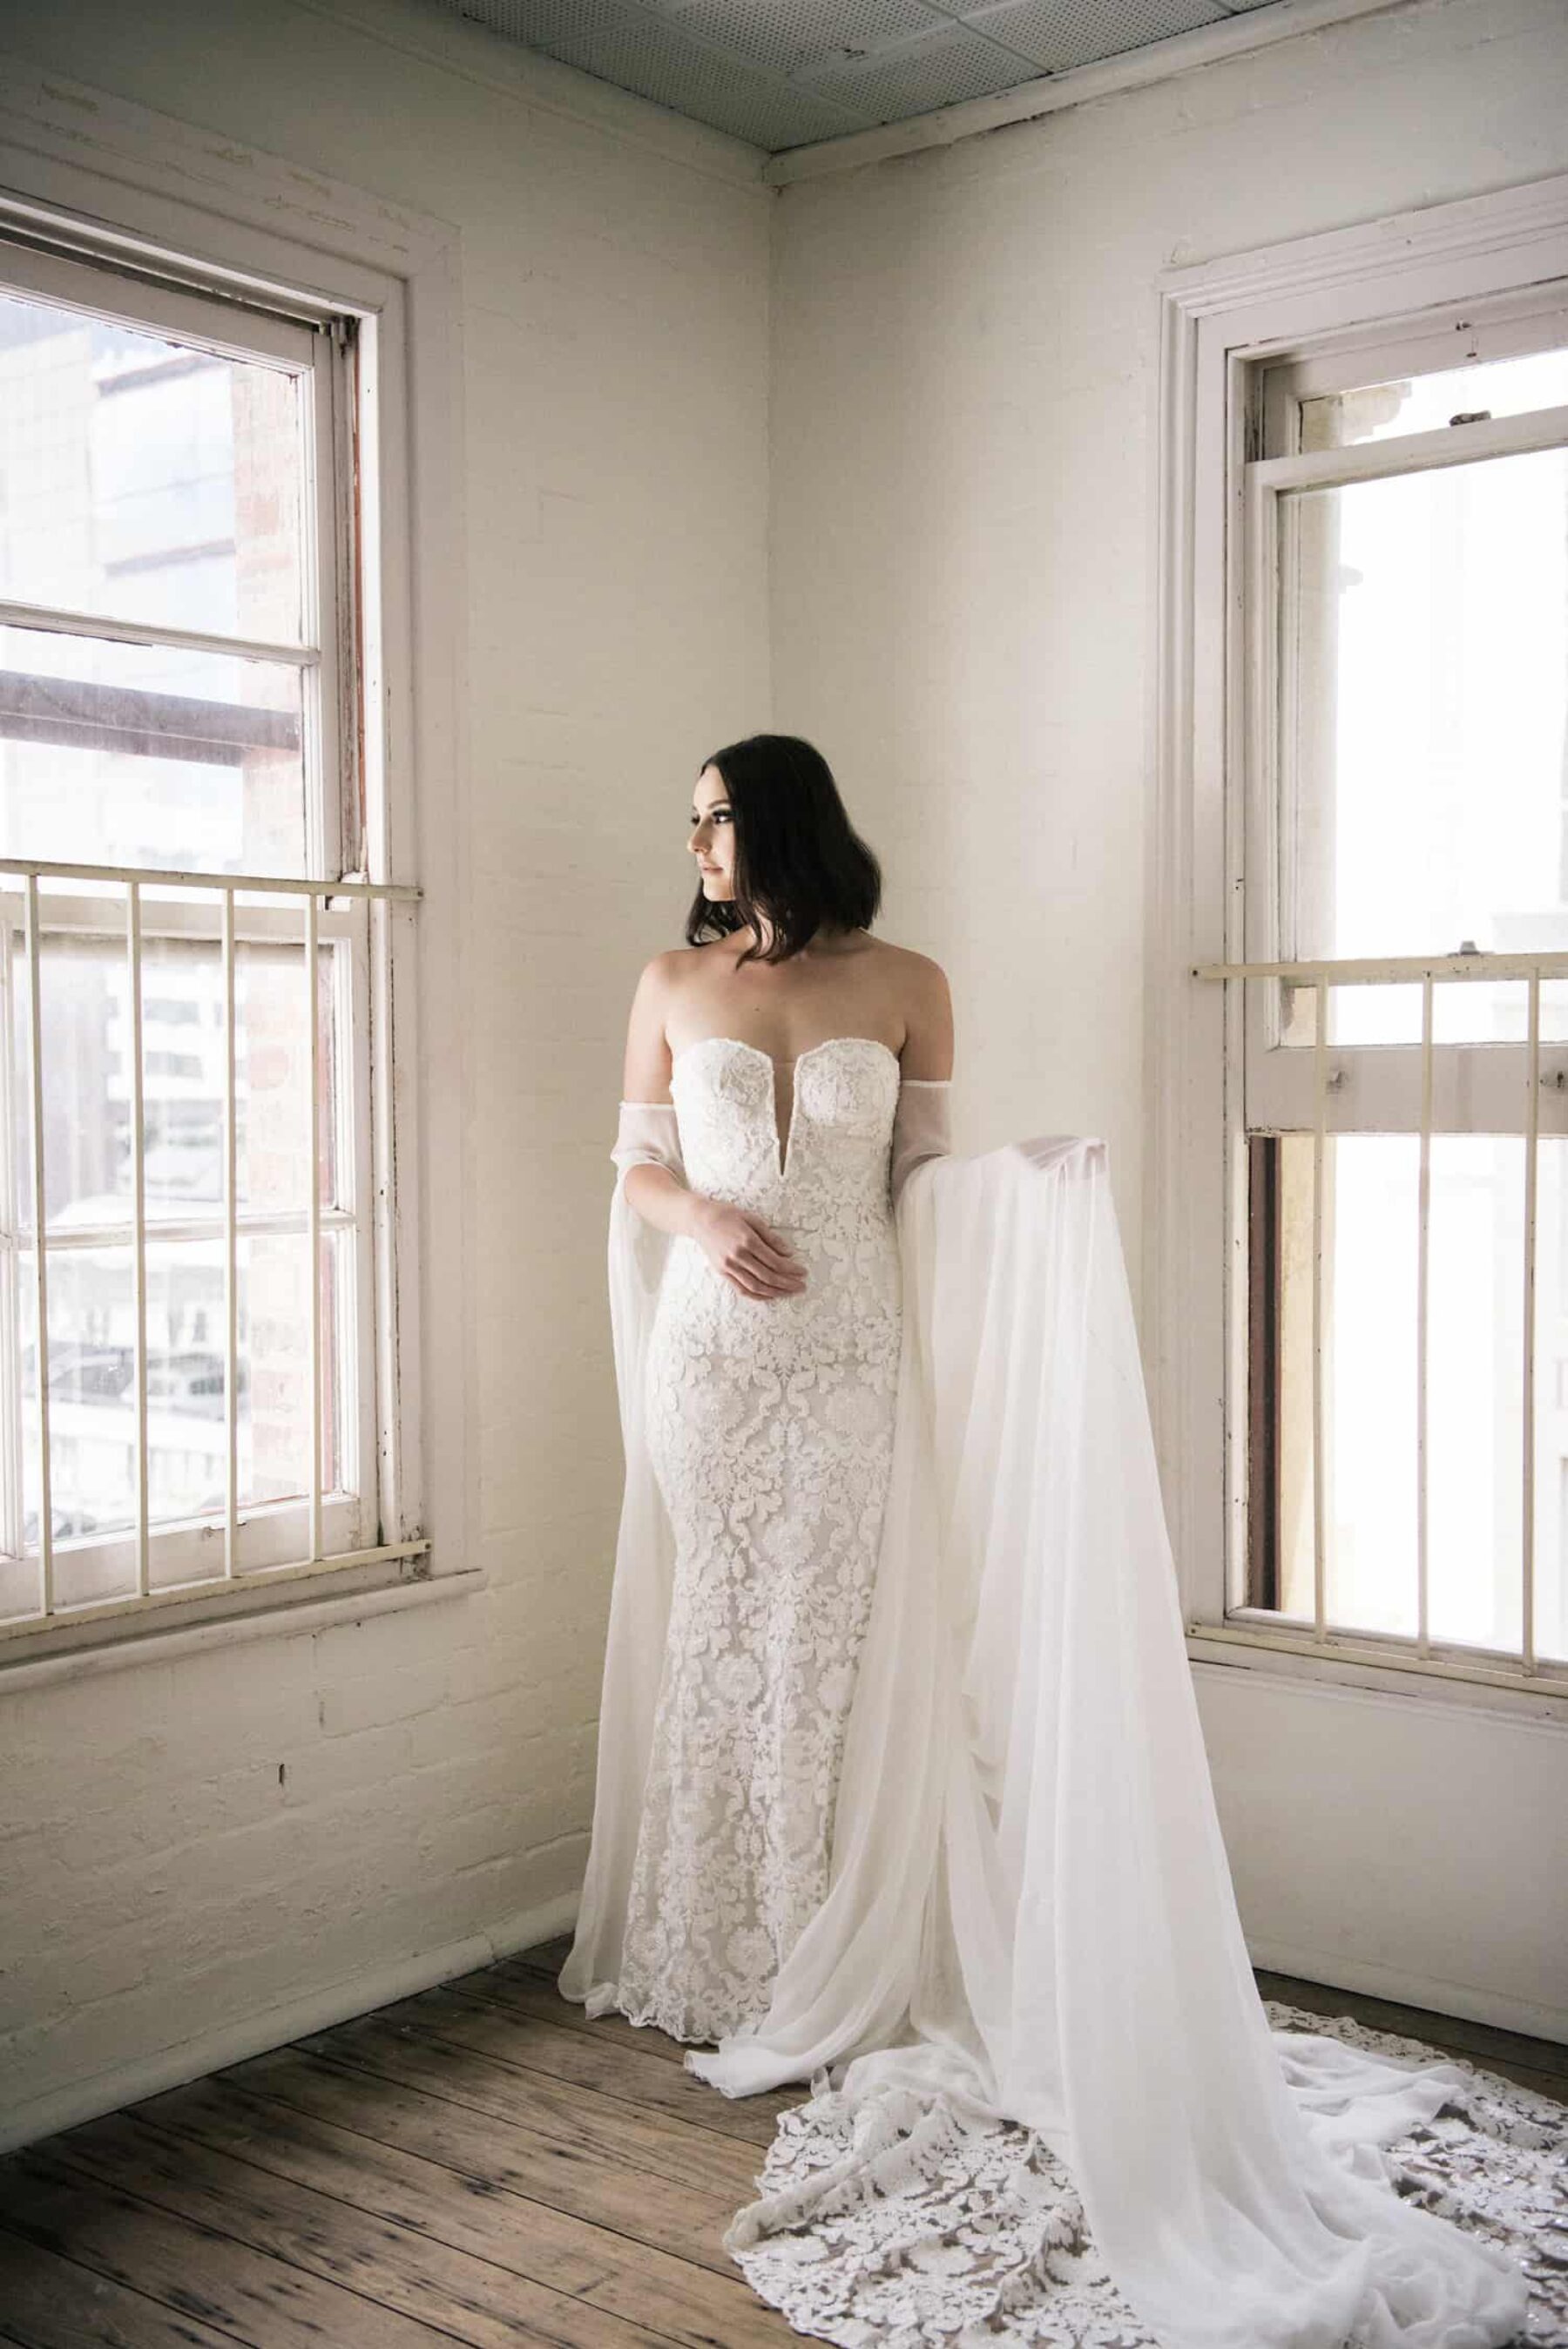 strapless wedding dress with sheer cape